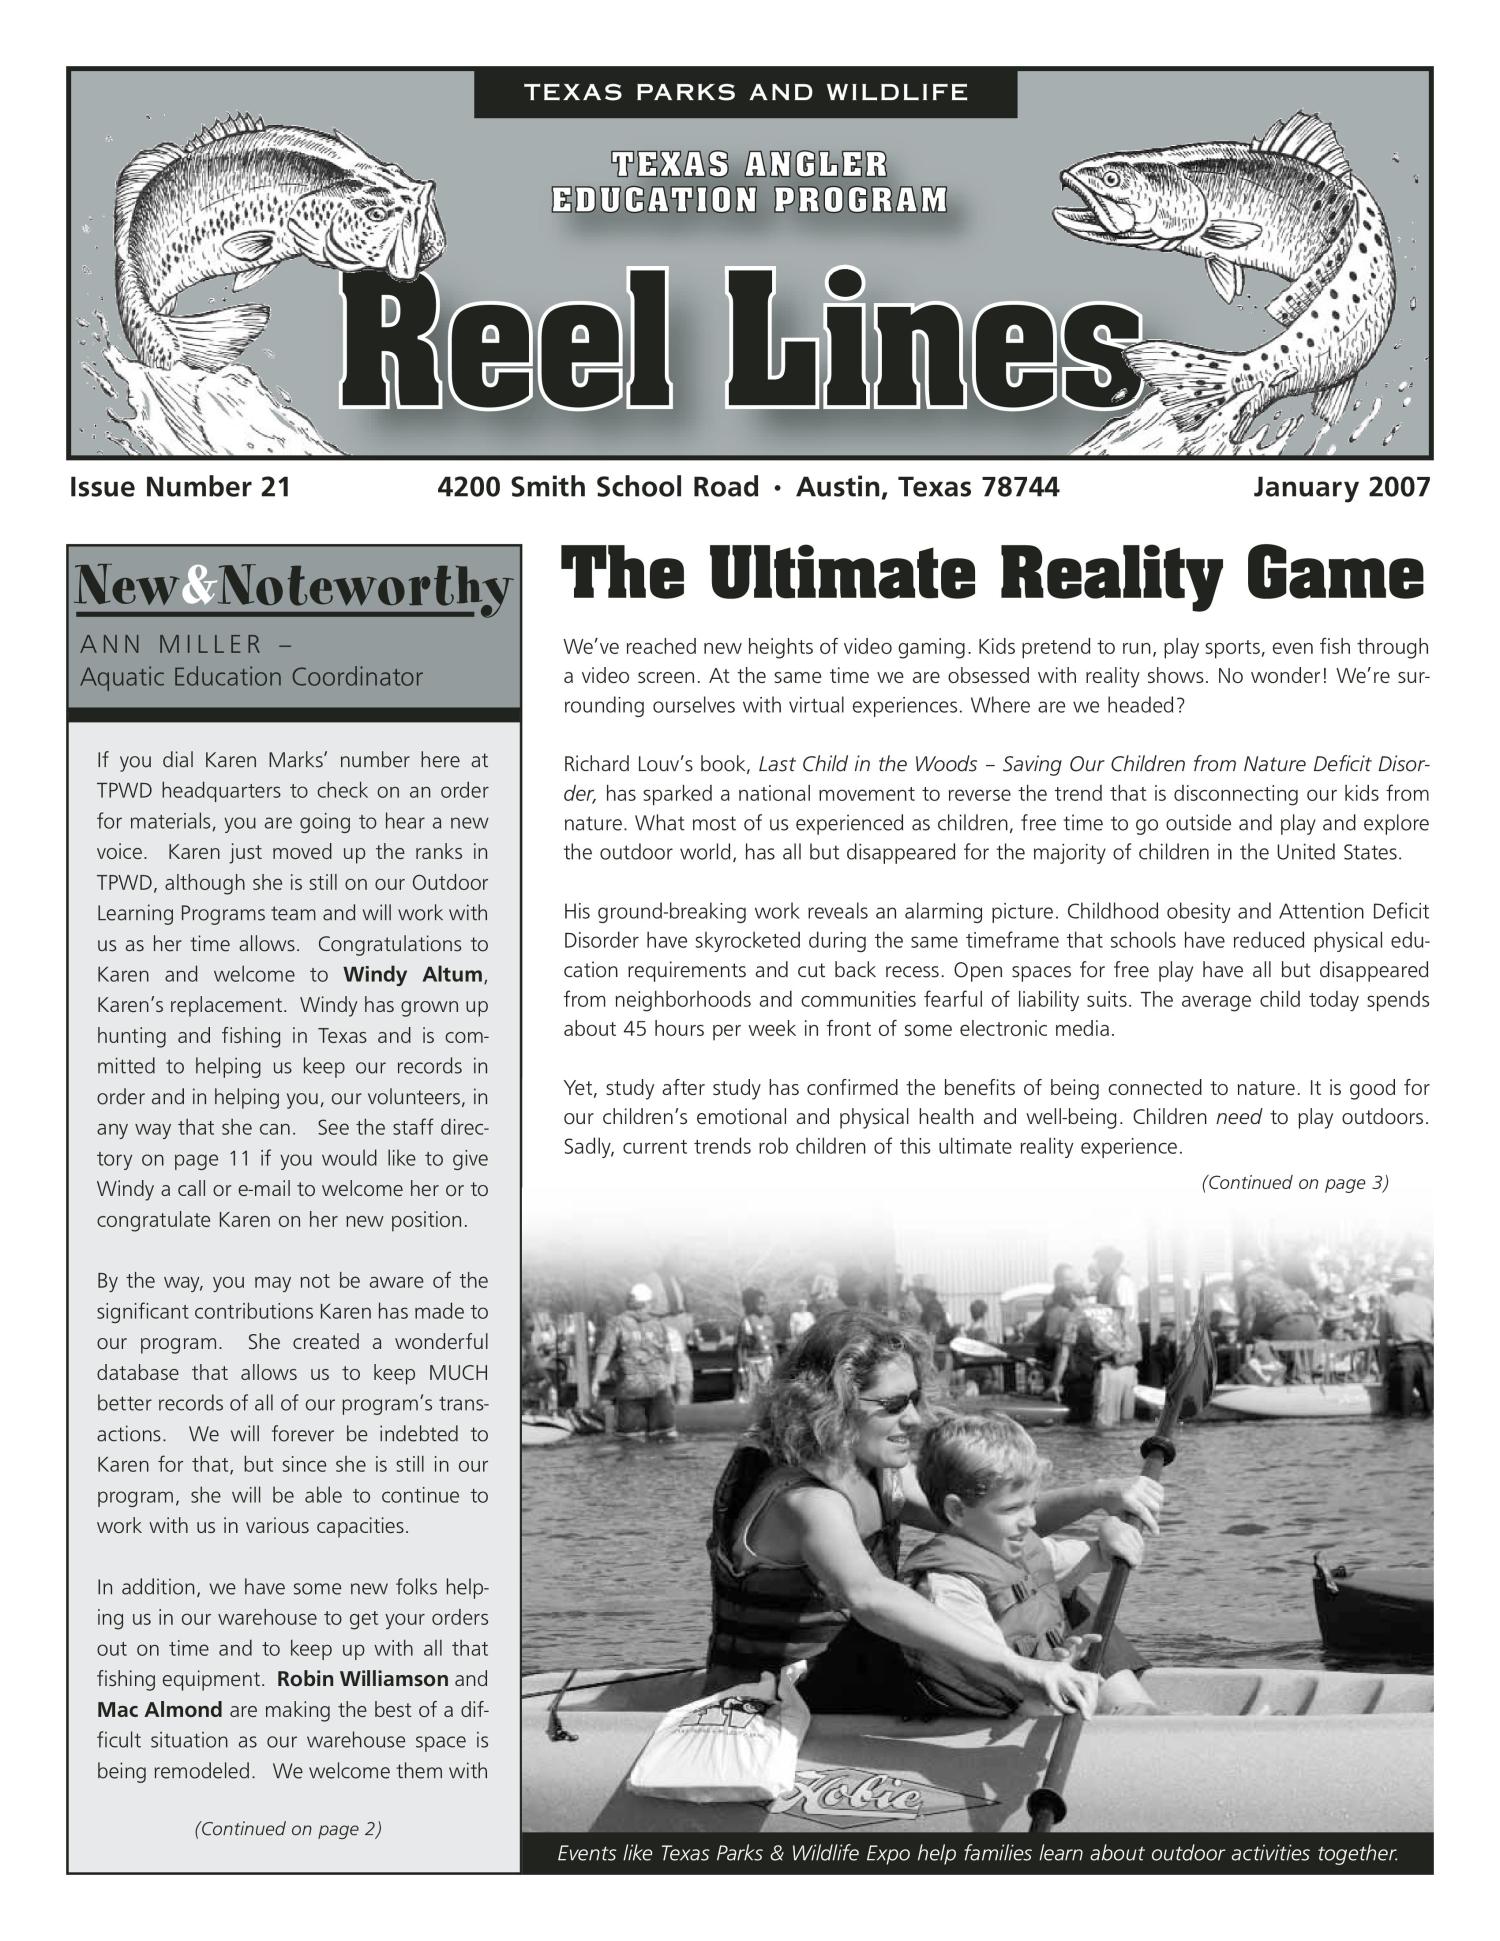 Reel Lines, Issue Number 21, January 2007 - The Portal to Texas History